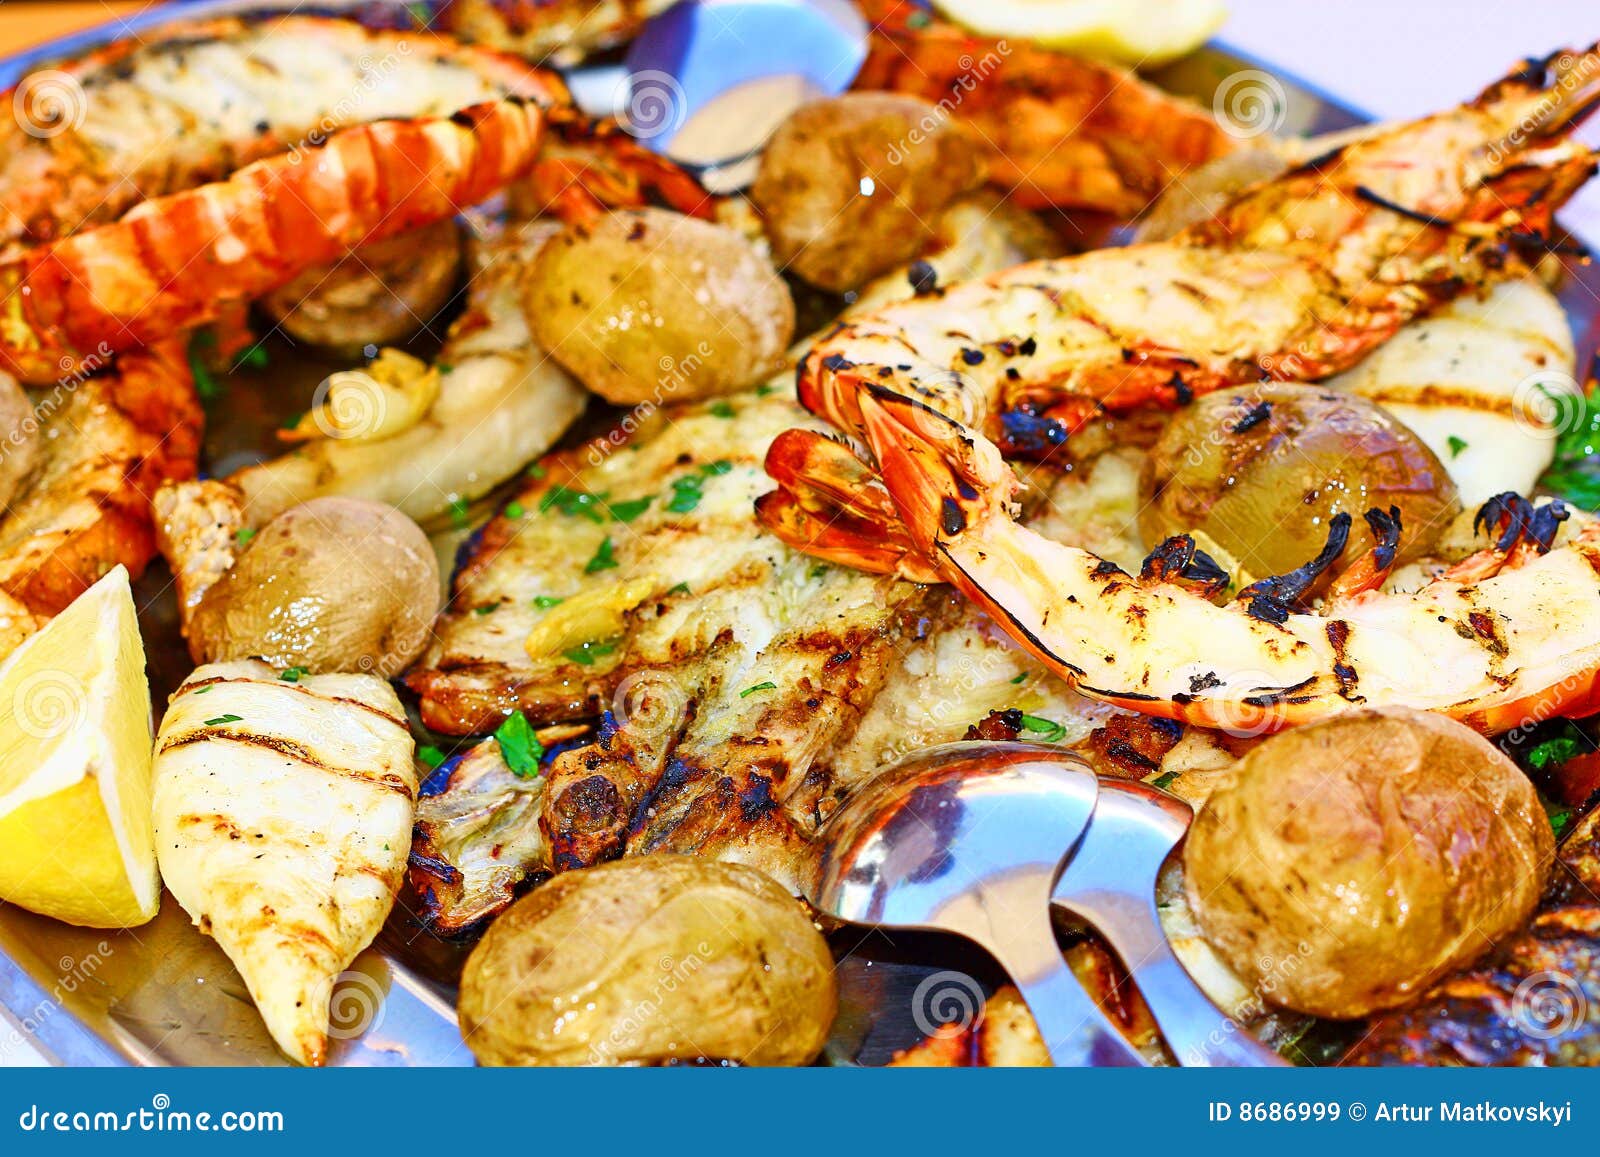 Seafood Royalty Free Stock Images - Image: 8686999